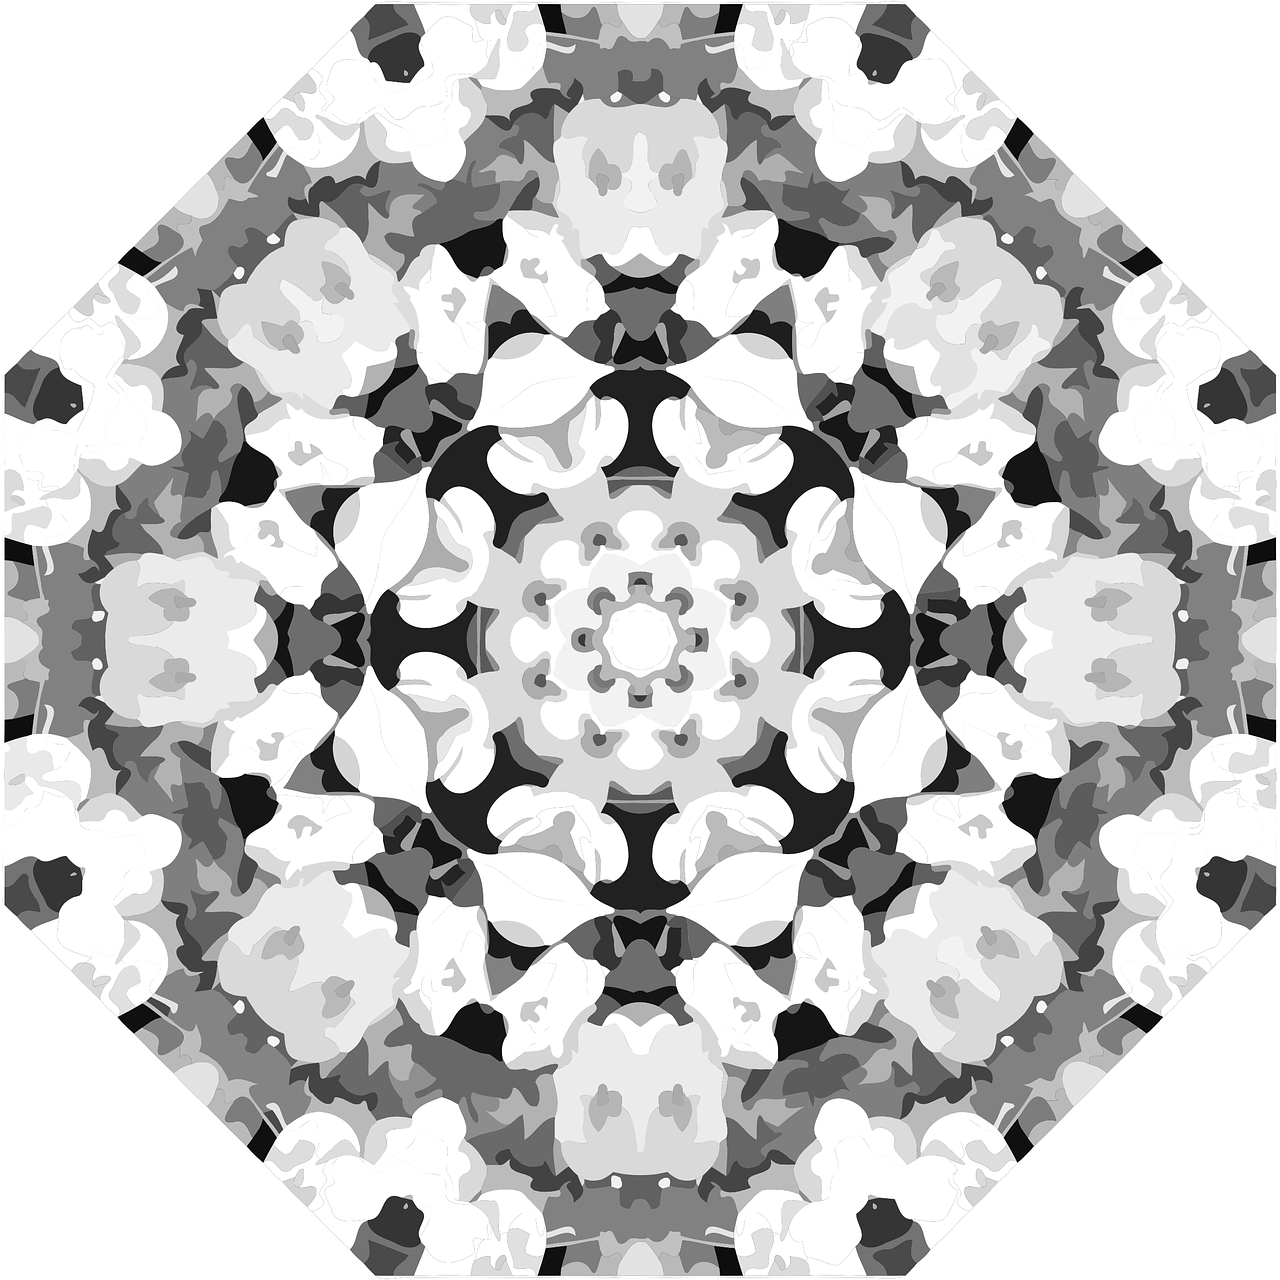 a black and white image of a snowflake, a digital rendering, generative art, seen through a kaleidoscope, hexagonal stones, rorschach test, floral dream